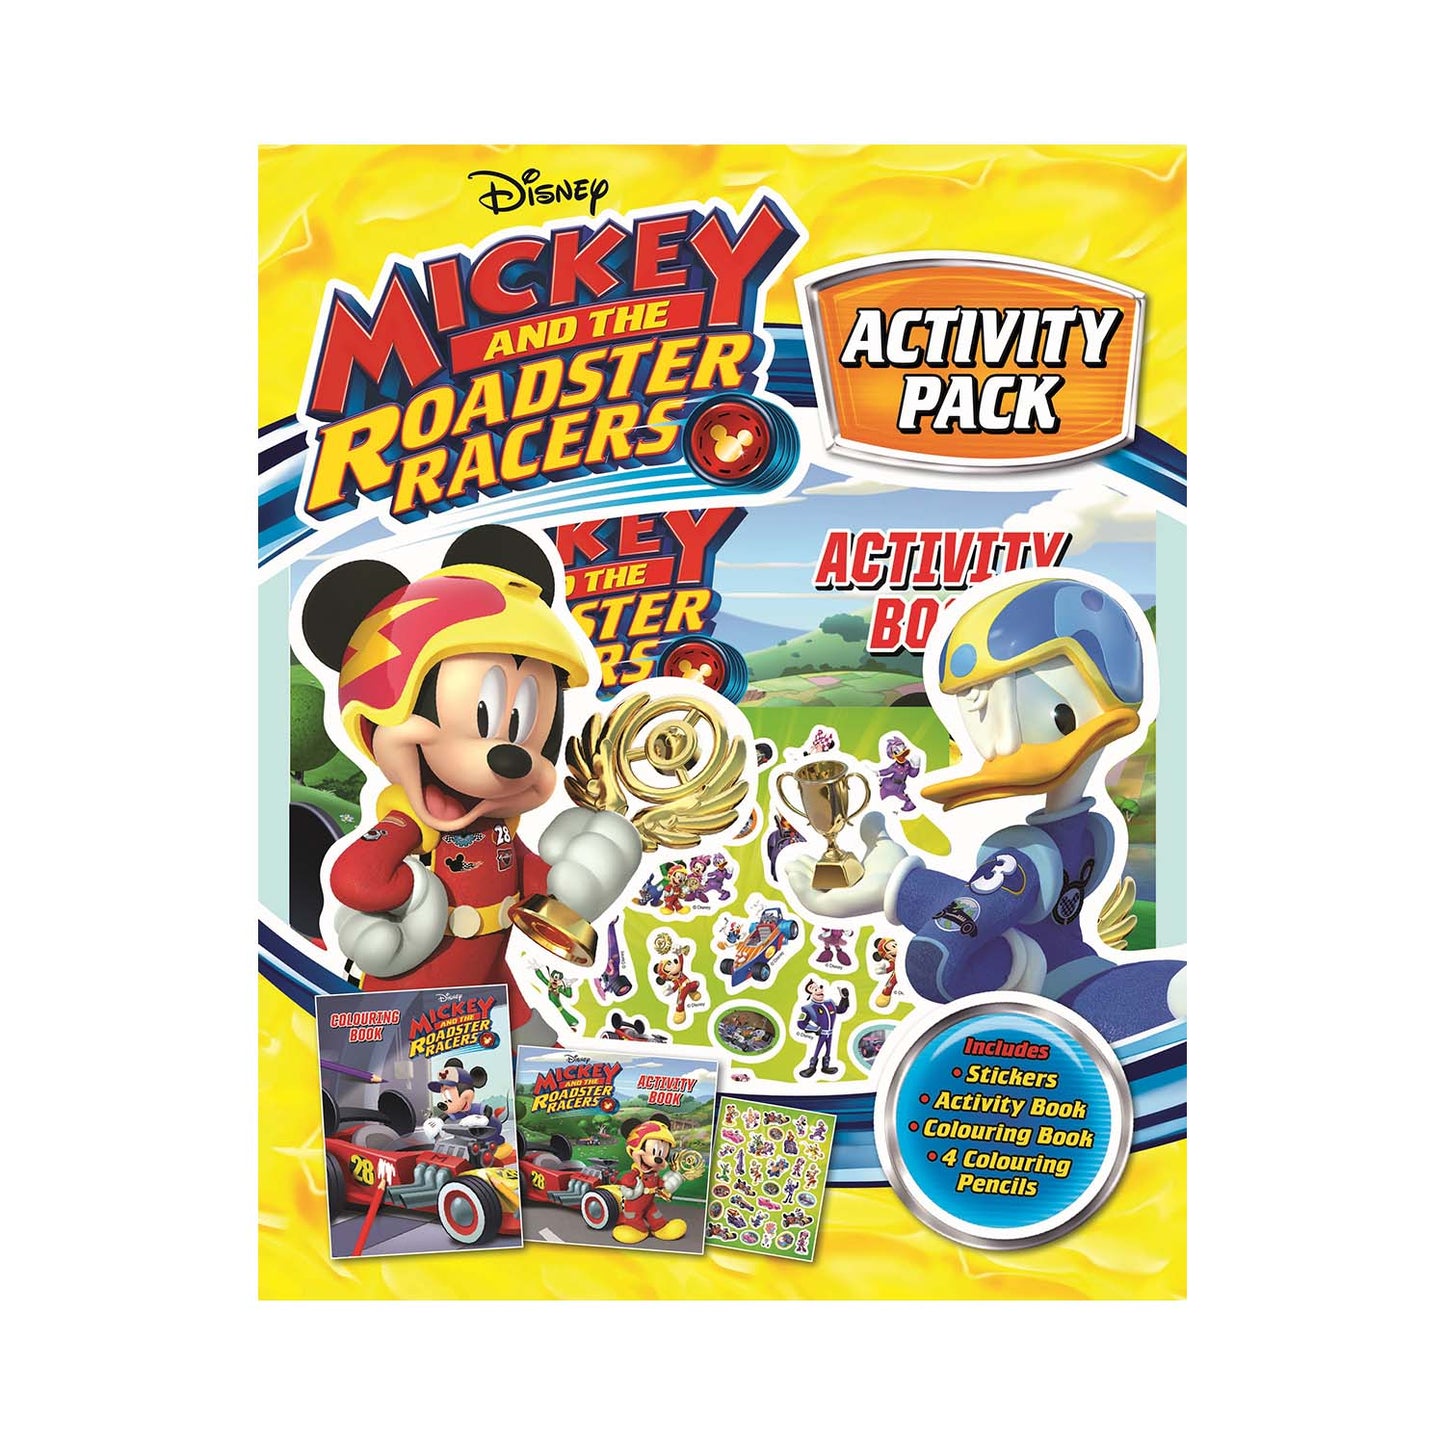 Disney Mickey And The Roadster Racers Activity Pack (2-in-1 Activity Bag Disney) Parragon Publishing India